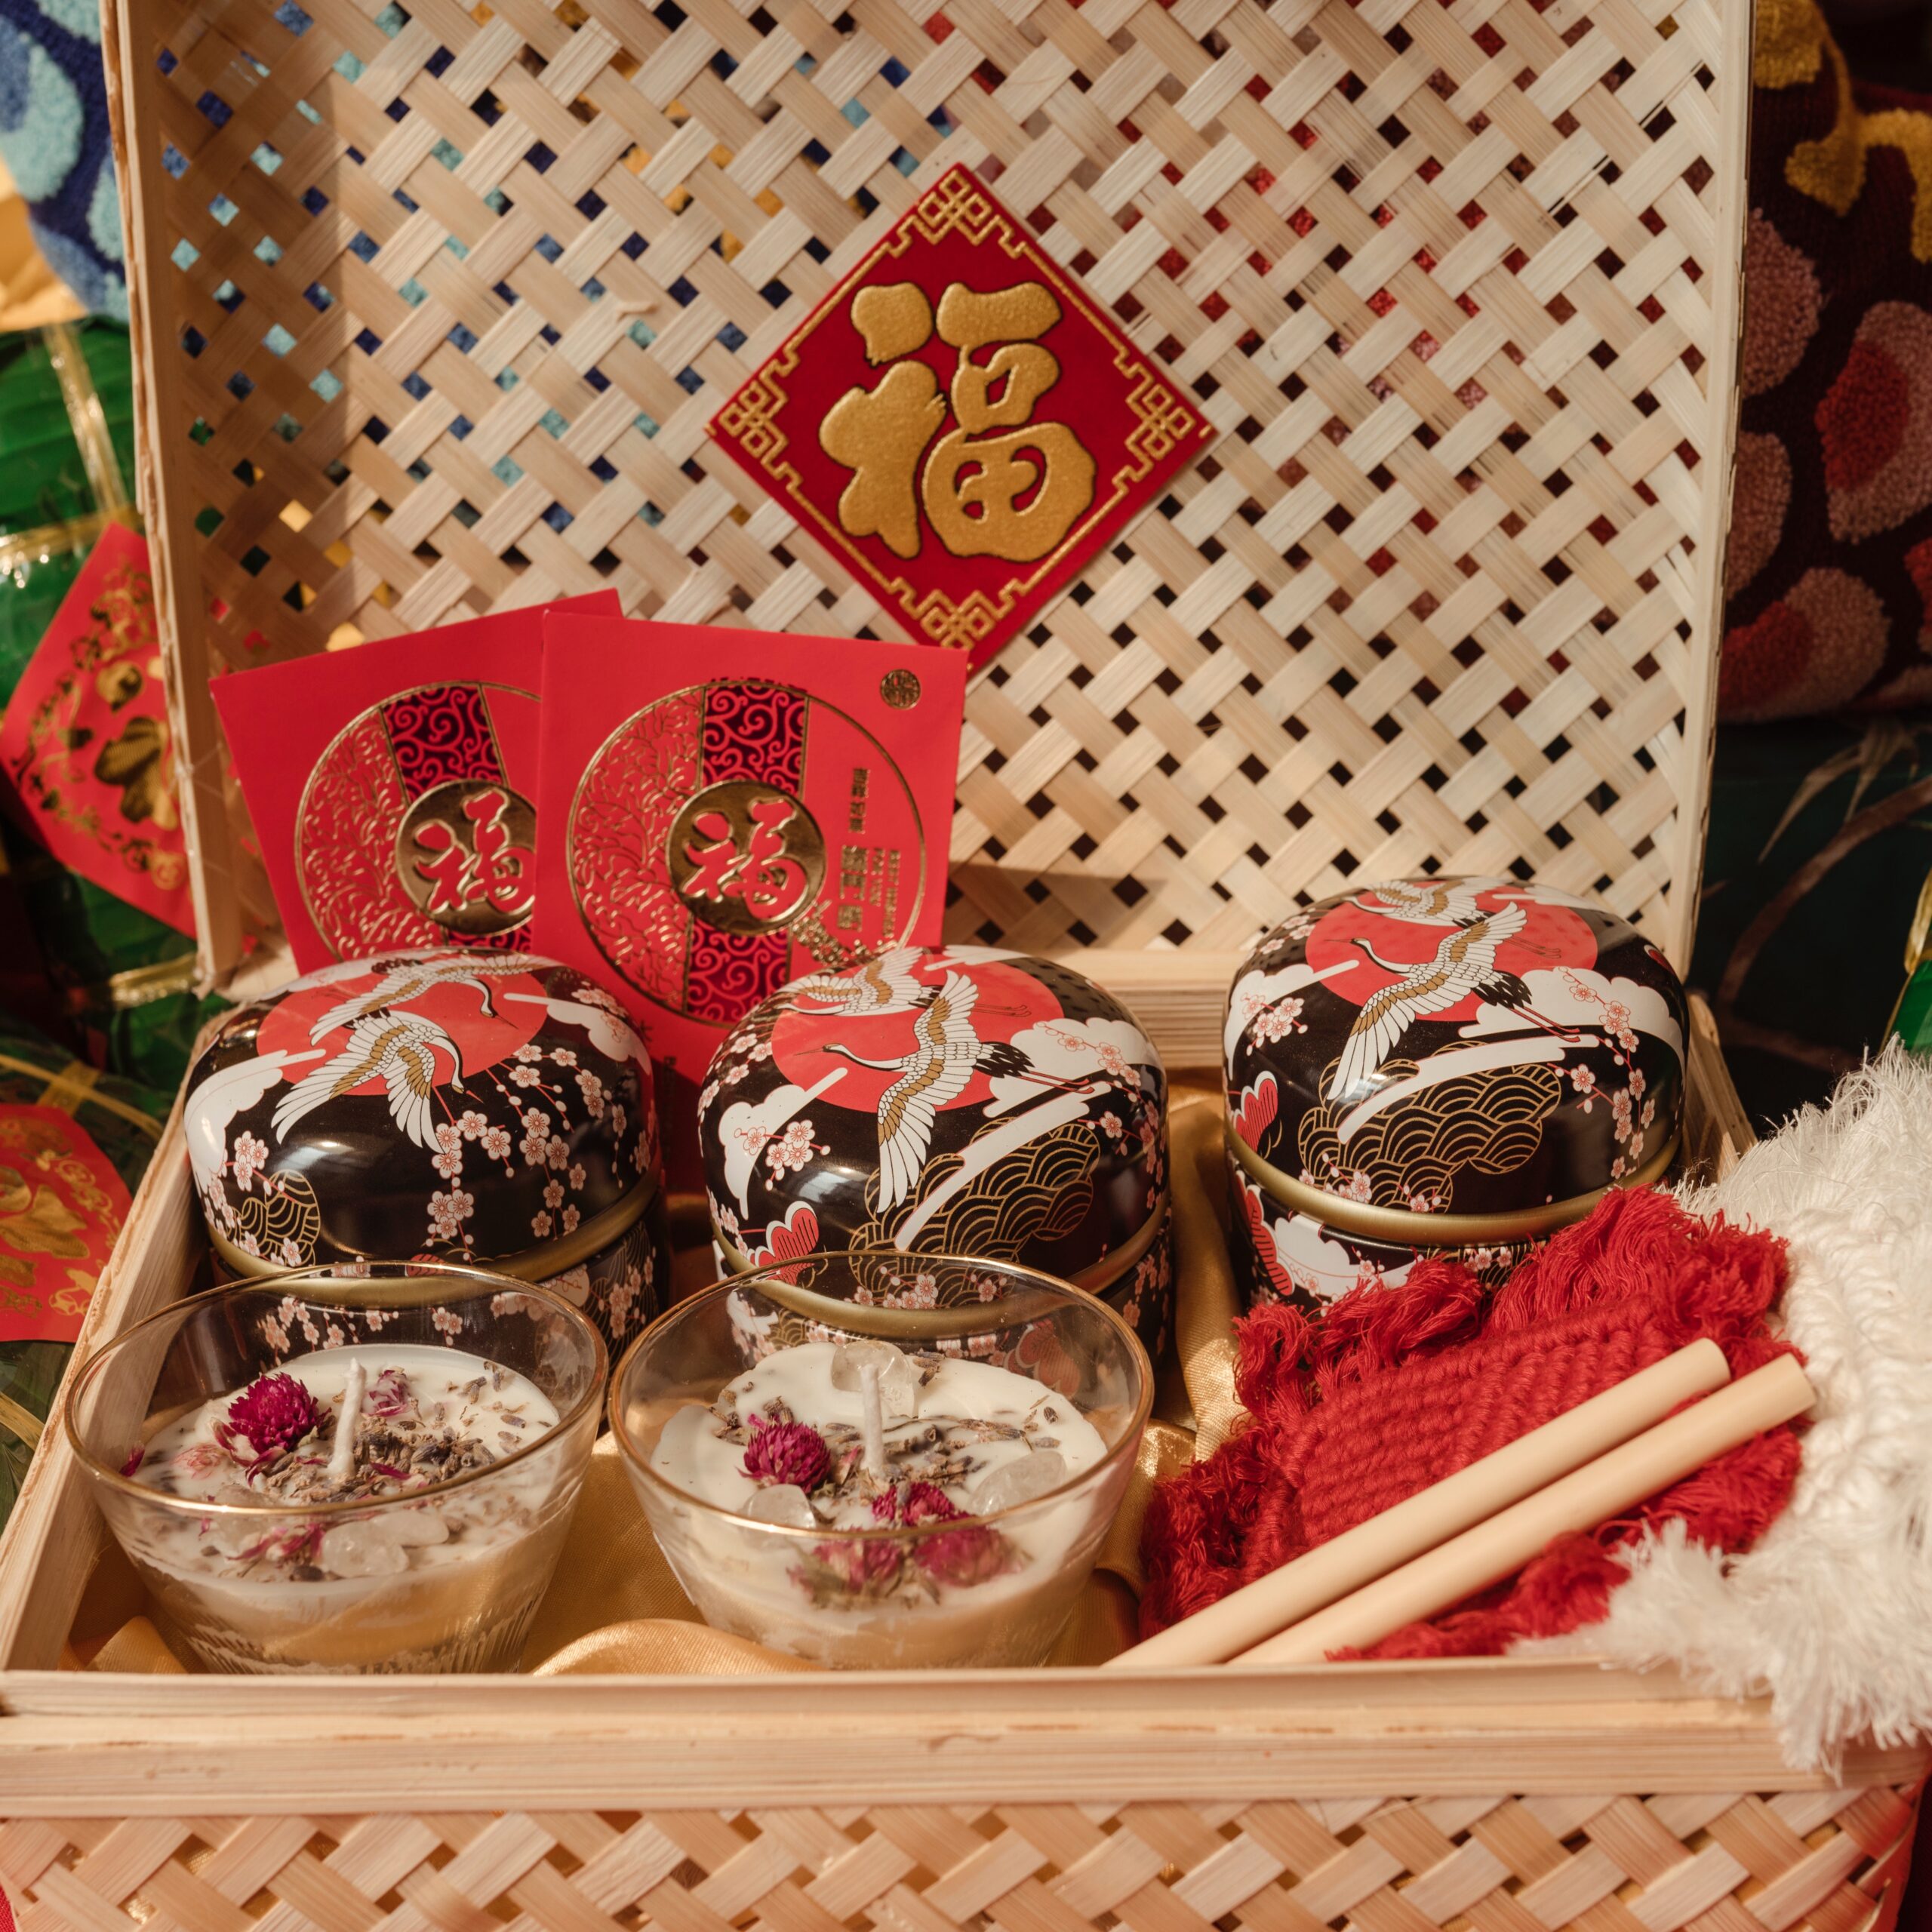 Image of a Lunar New Year gift set in a wicker box consisting of red envelopes, treats and decor.